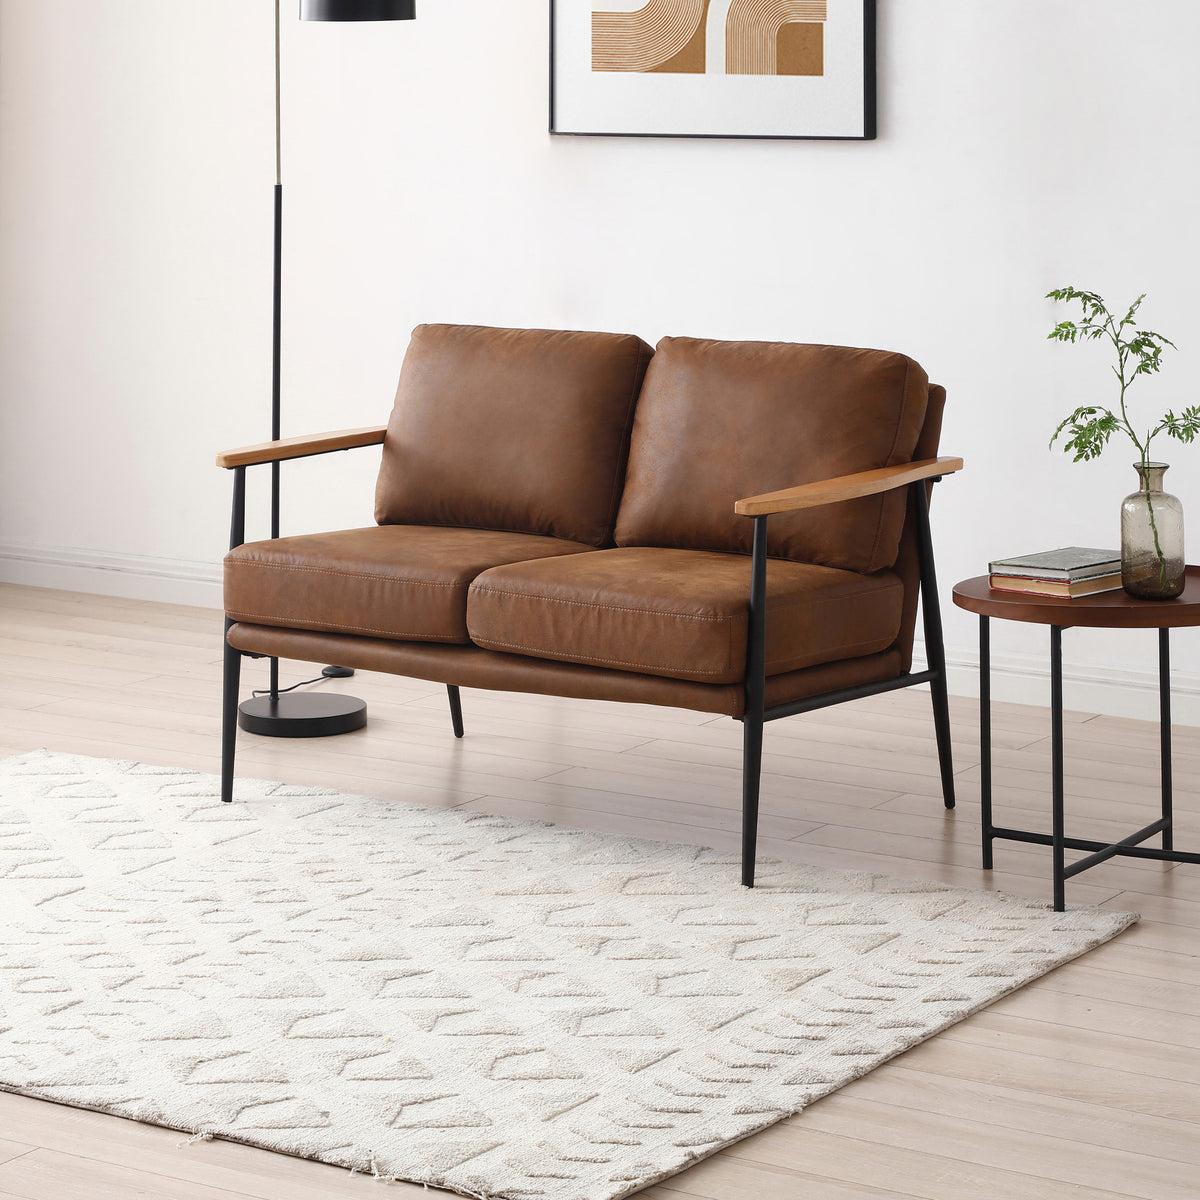 Harlem Brown Faux Leather 2 Seater Sofa for living room